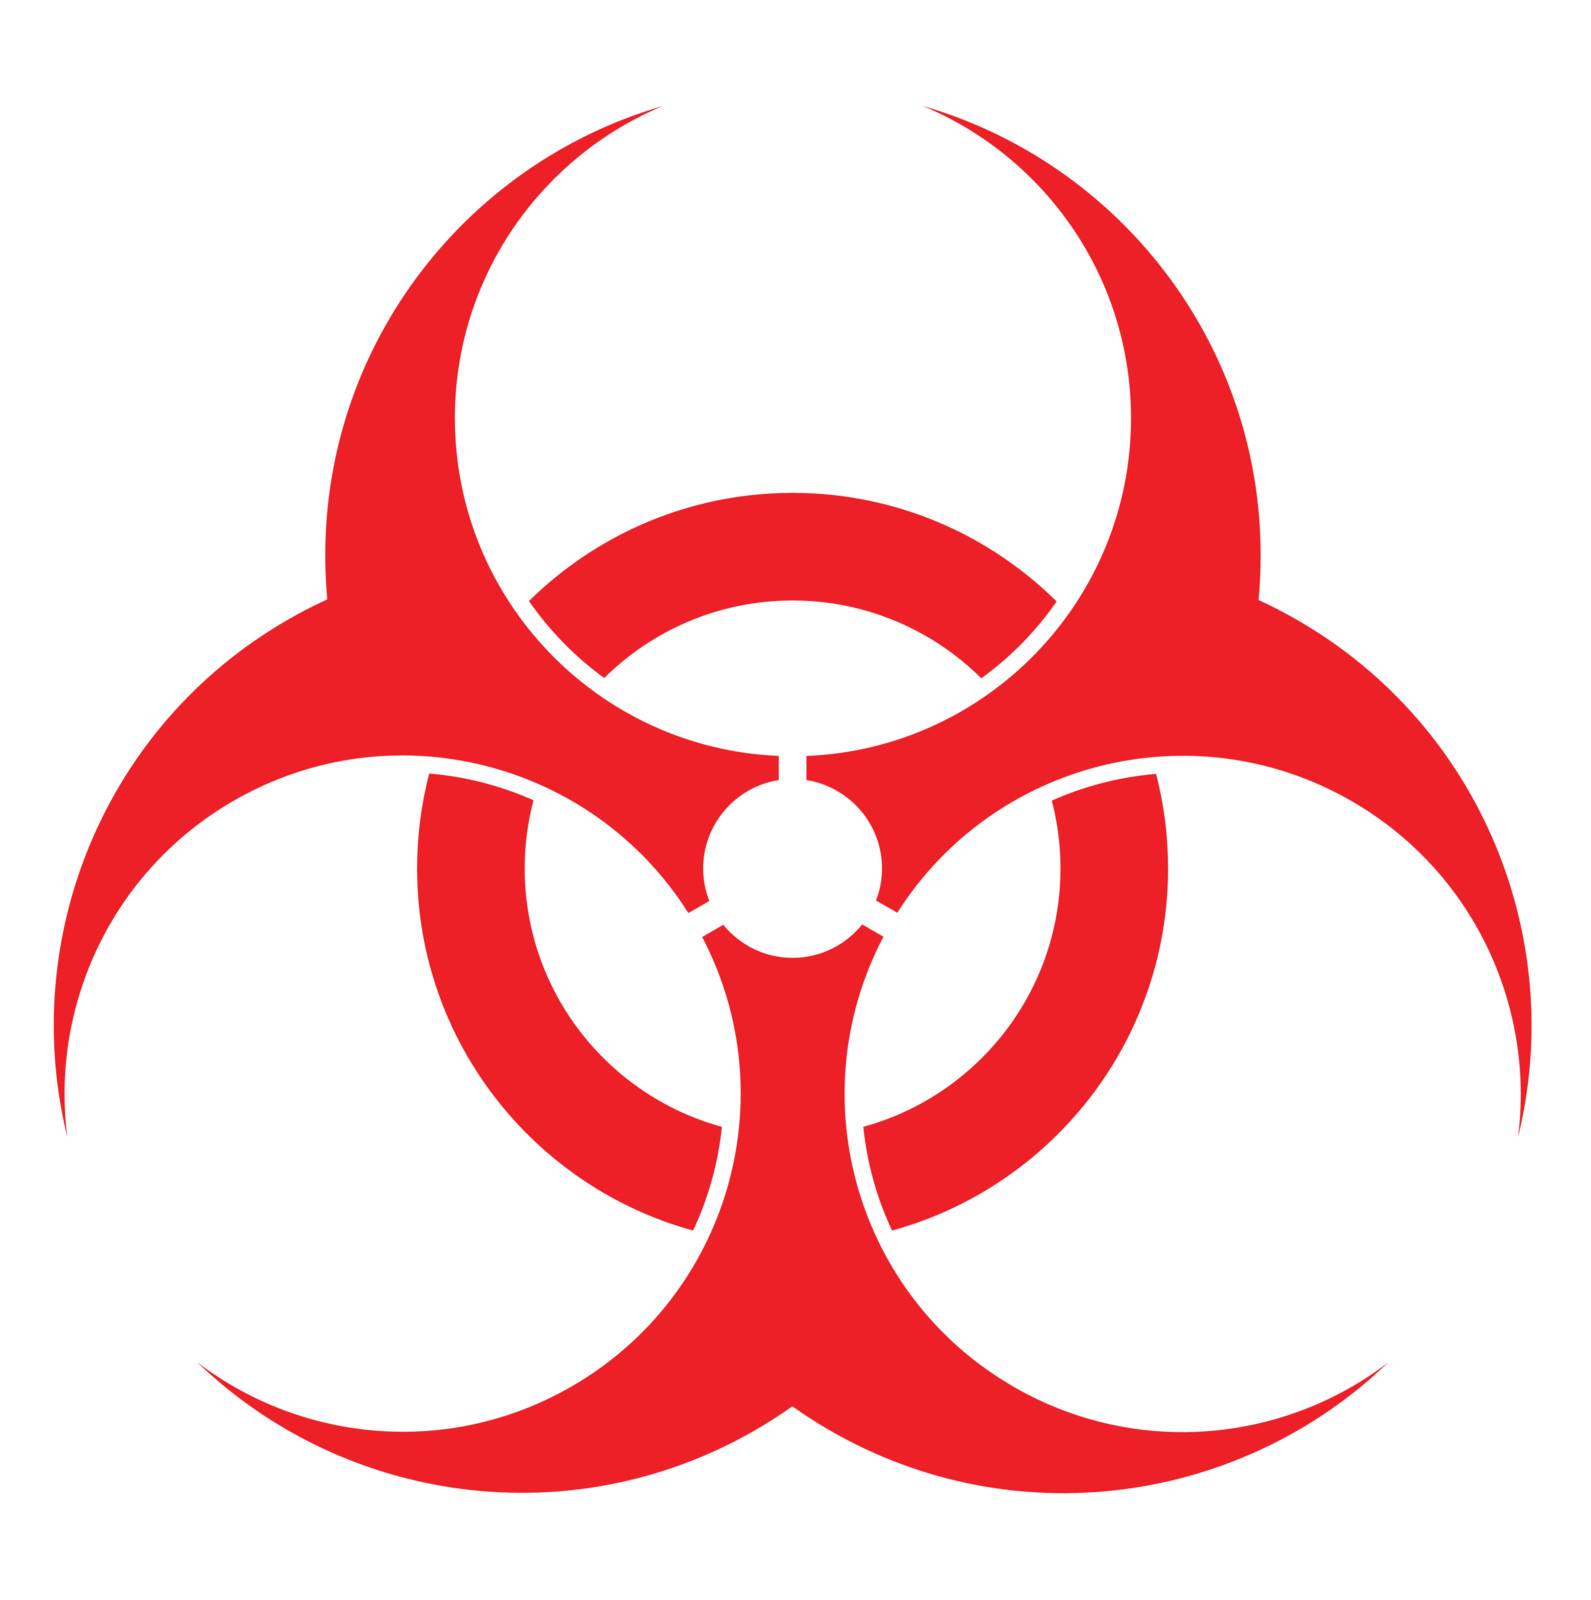 biohazard sign, vector format, for health industry concepts.